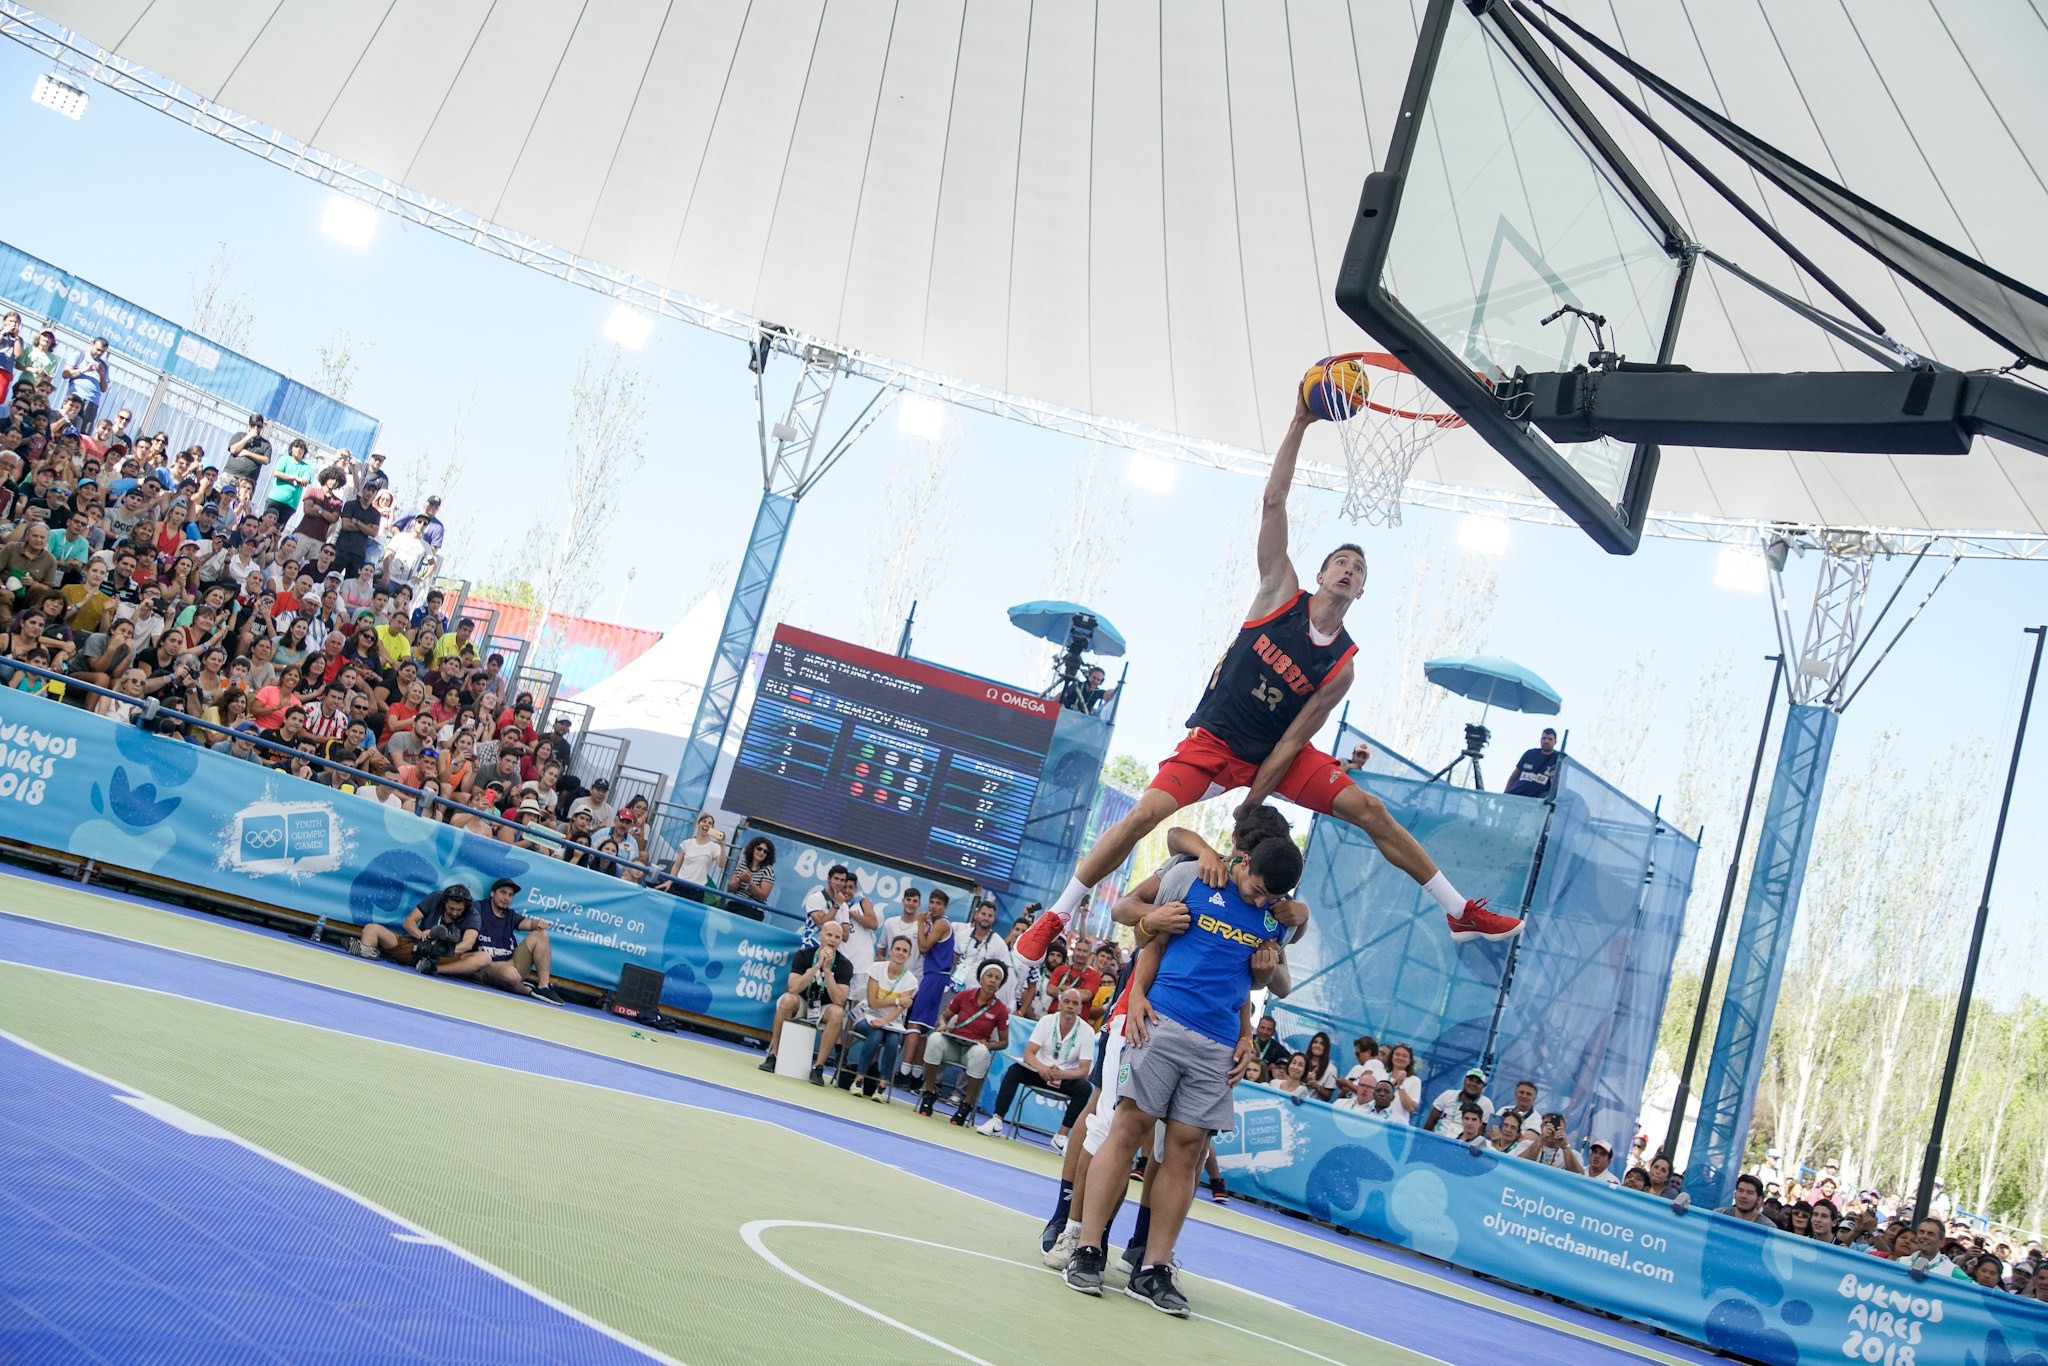 The men's dunk contest was among the highlights at the Urban Park ©Buenos Aires 2018